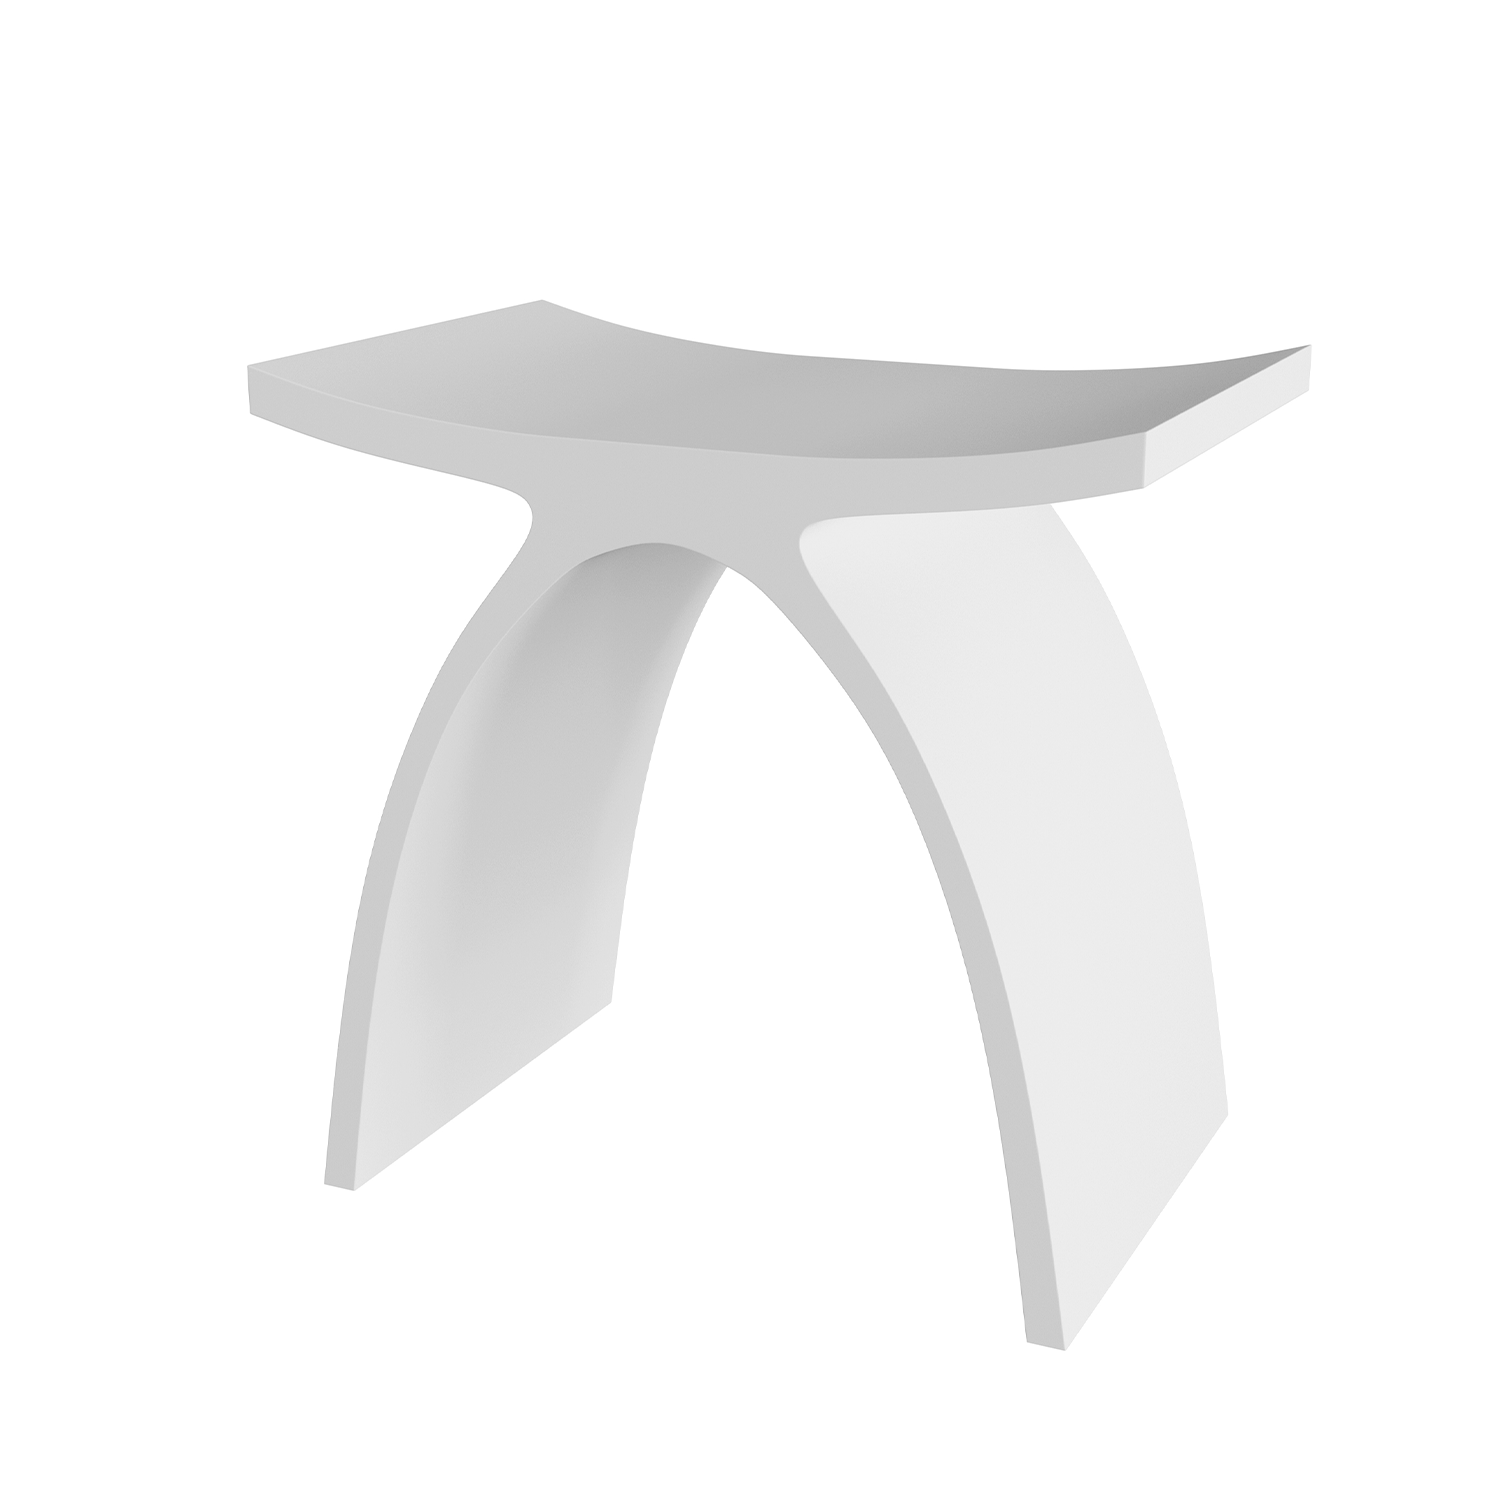 DAX Solid Surface Bathroom Stool, Standfree, Matte White Finish, 16-3/4 x 16-3/4 x 9-1/16 Inches (DAX-ST-01)